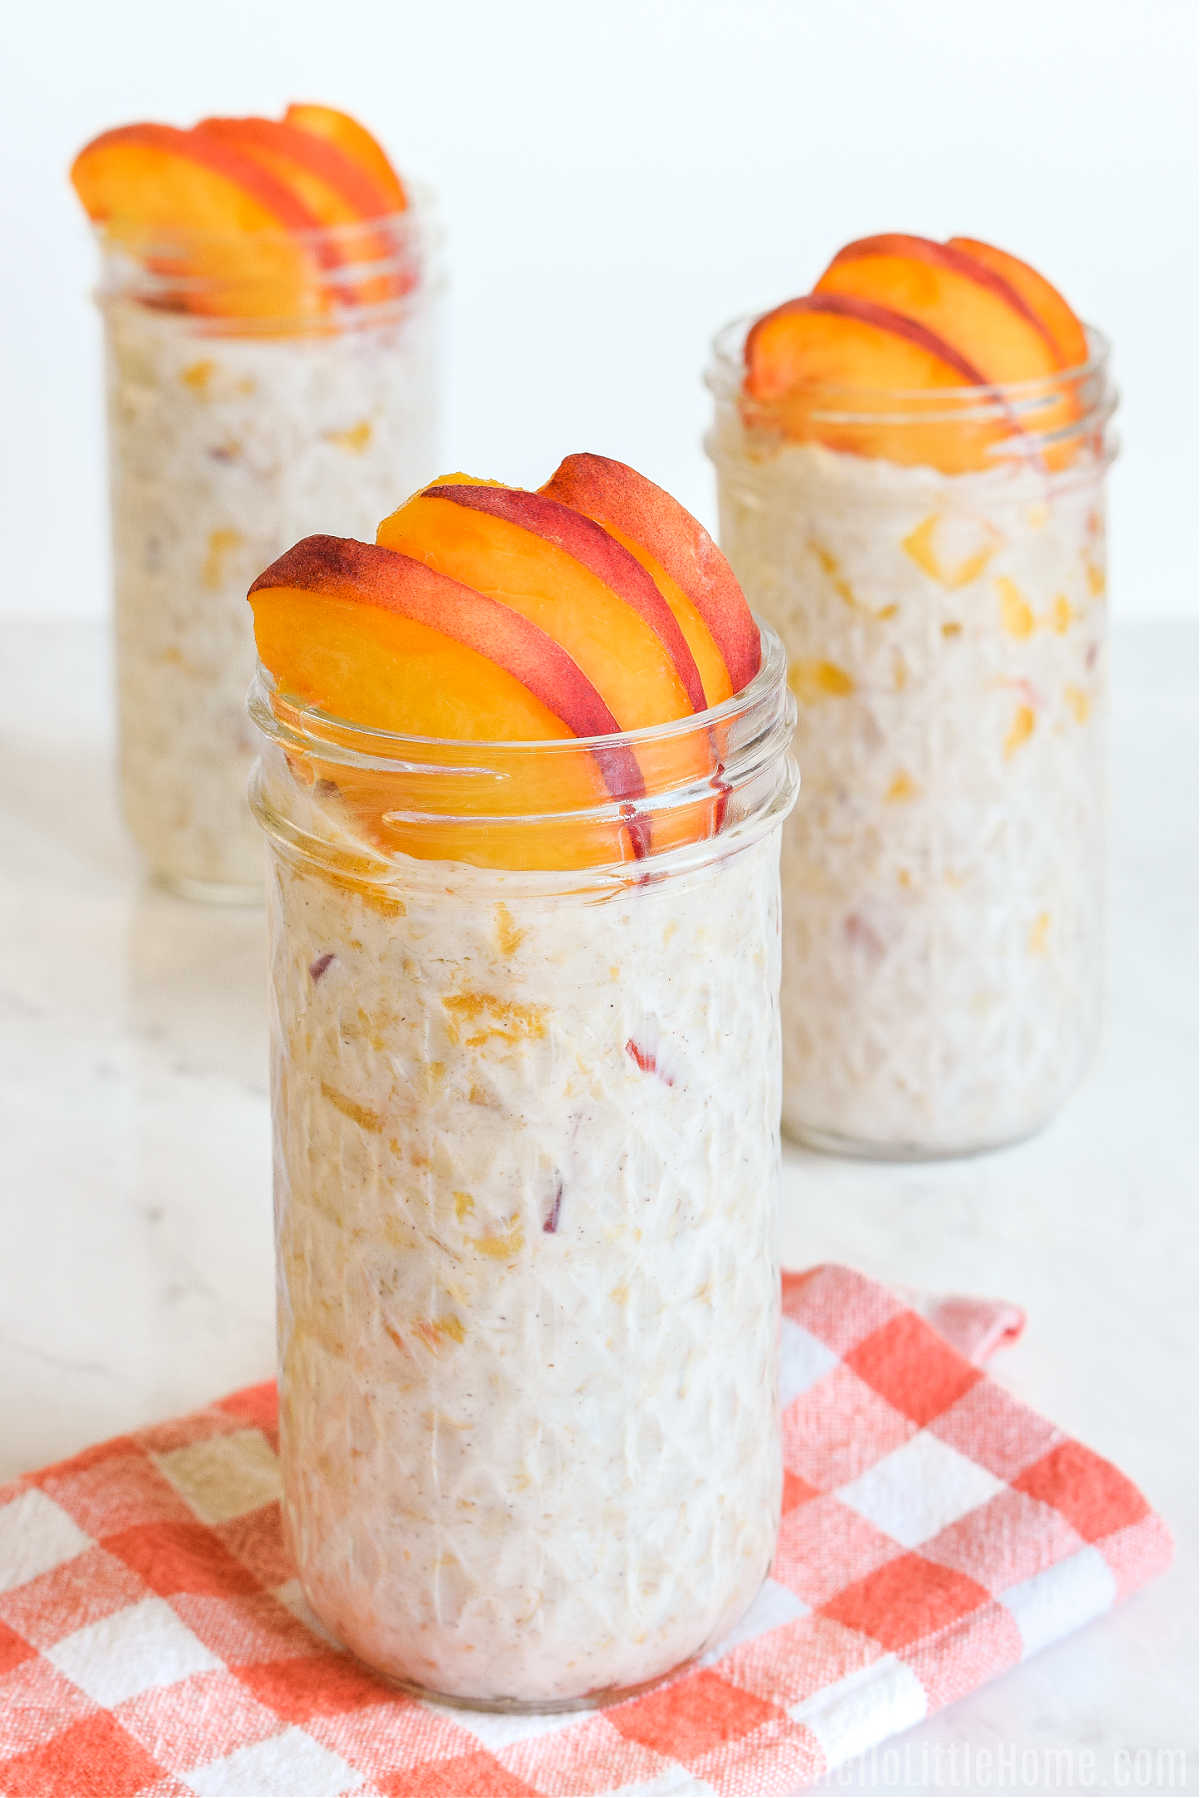 Three jars of the peaches and cream oats and a checked napkin on a marble counter.